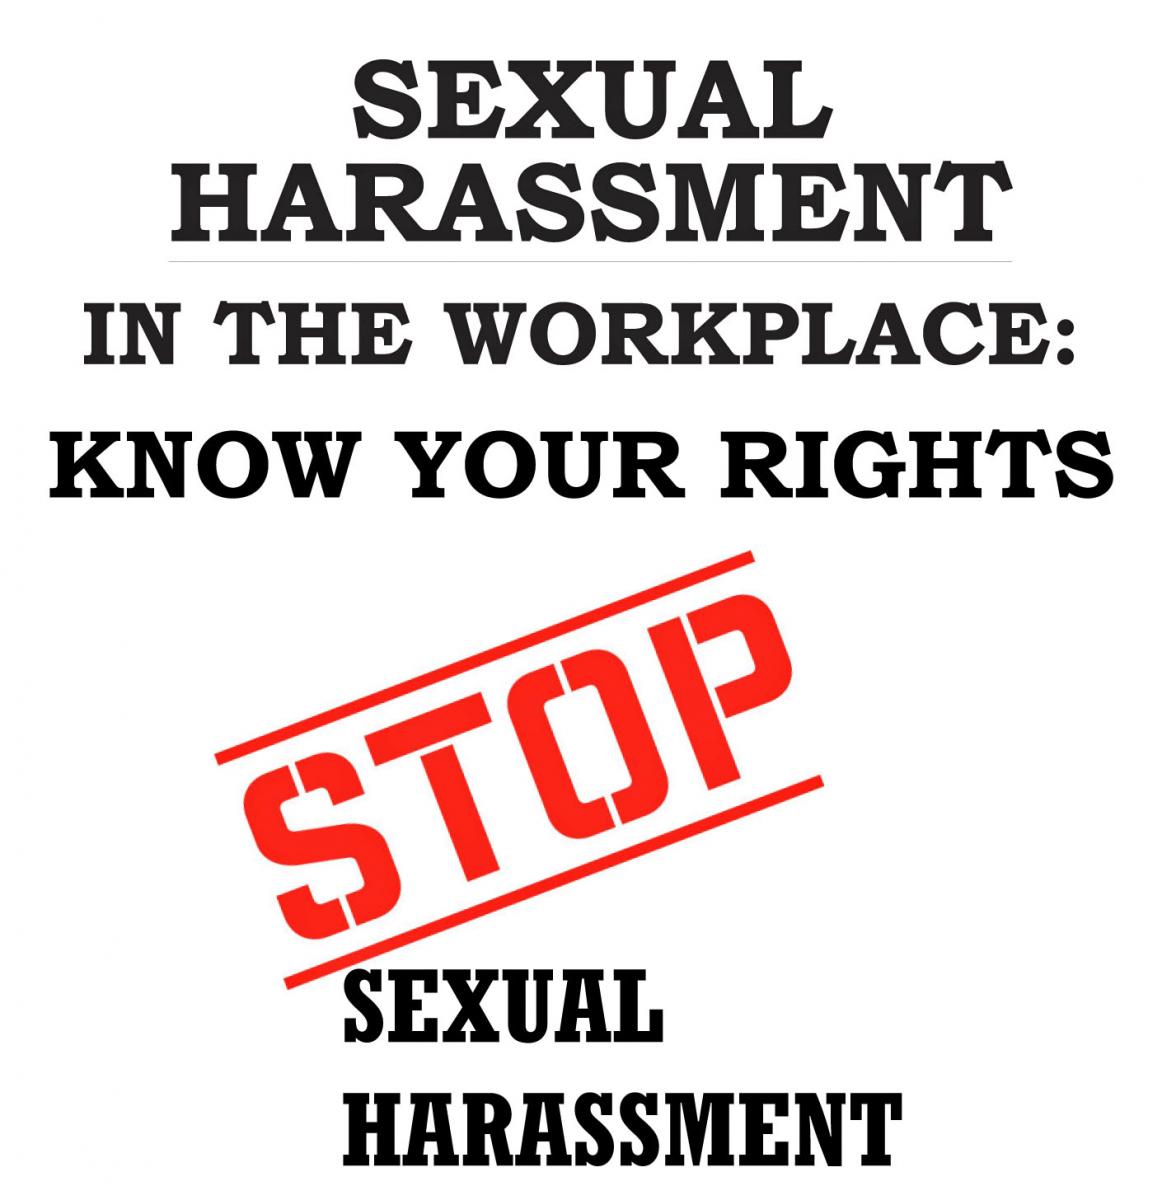 Sexual Discrimination The Workplace Adult Videos